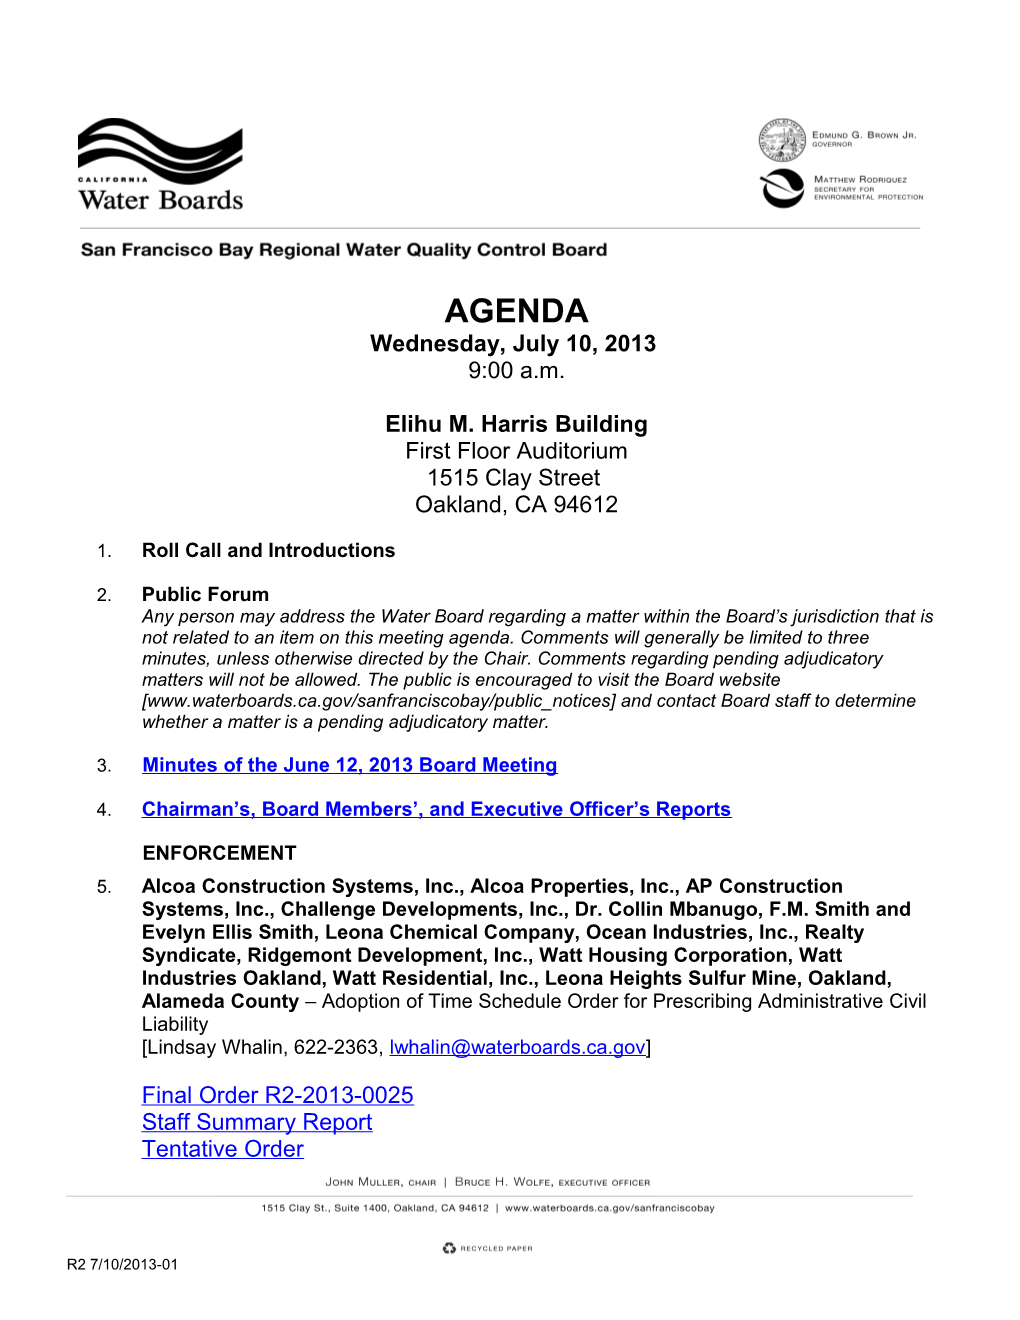 Water Board Meeting Agendapage 1